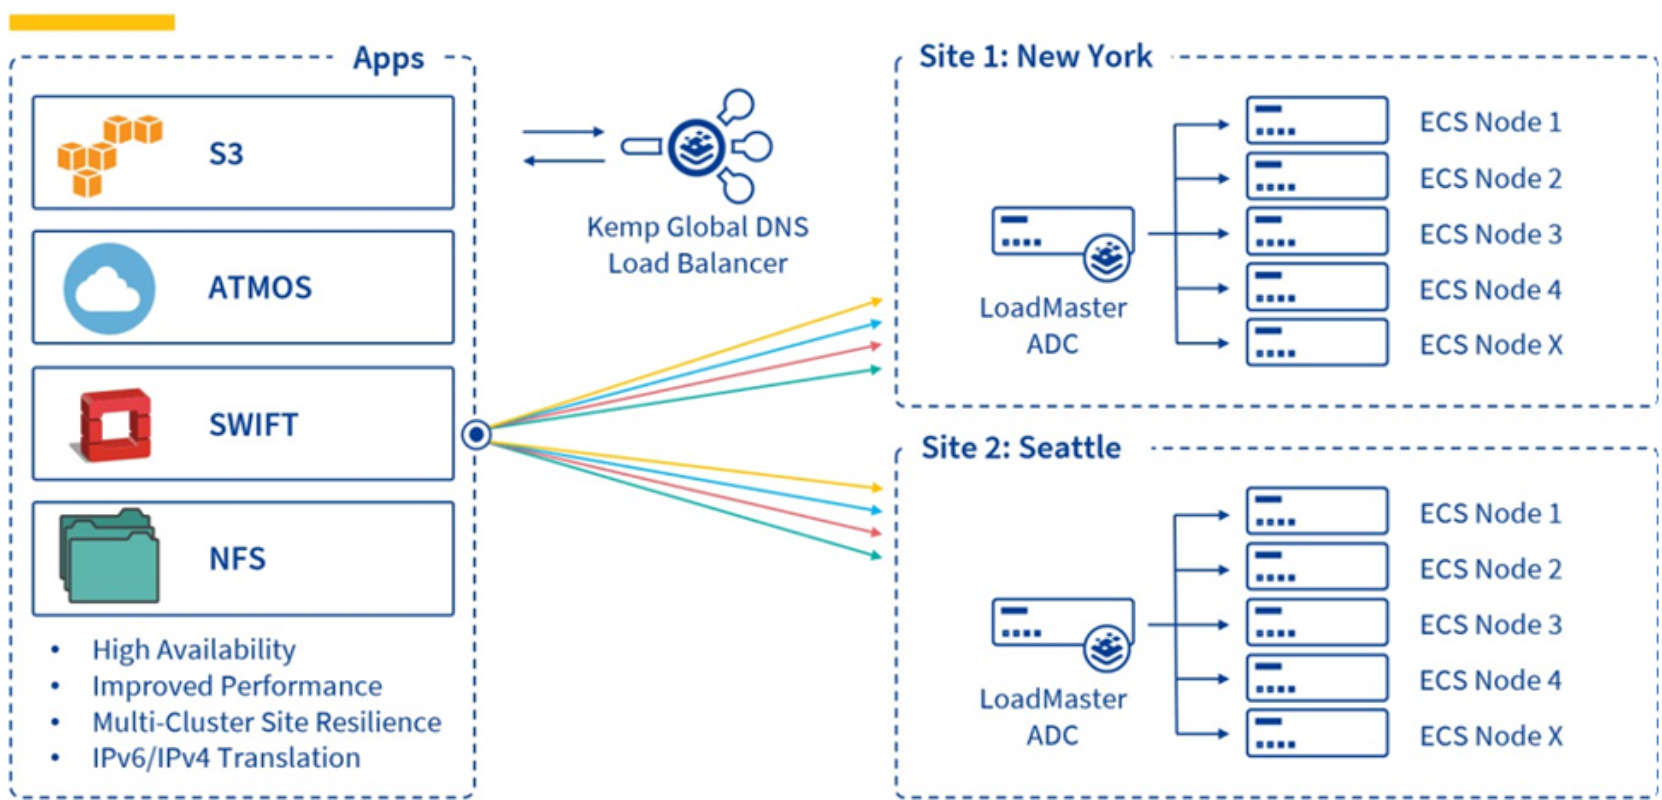 Applications accessing storage via a global kemp load balancer that directs data traffic between two geographically located Dell ECS clusters